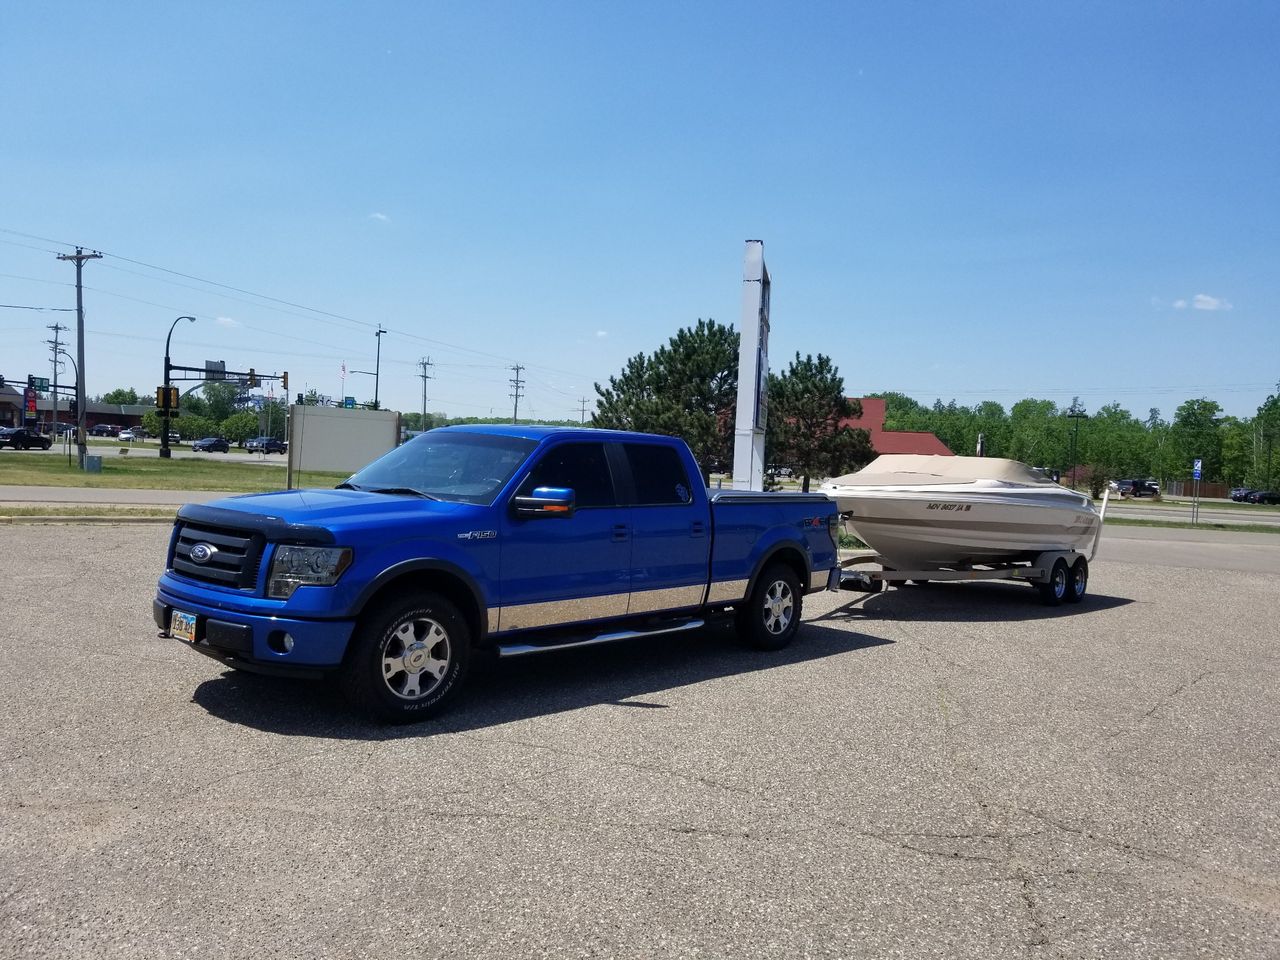 2009 Ford F-150 FX4 | Sioux Falls, SD, Blue Flame Clearcoat Metallic (Blue), 4x4